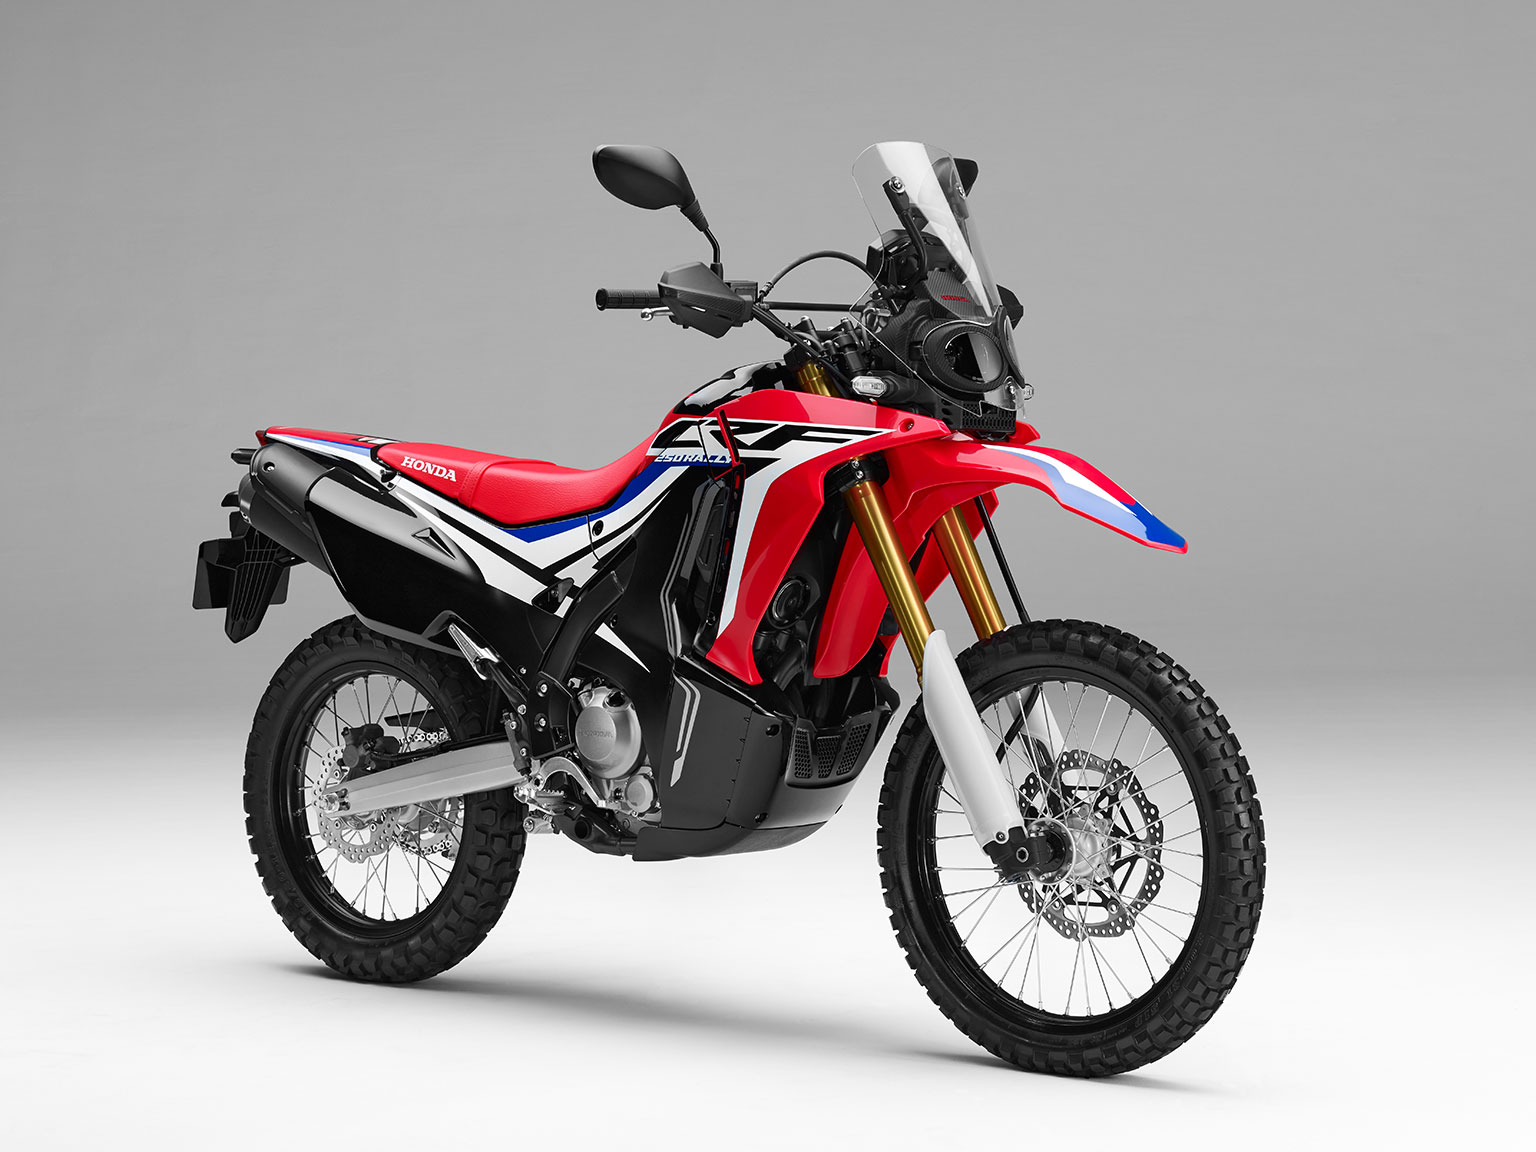 The CRF250 rally is a real looker!